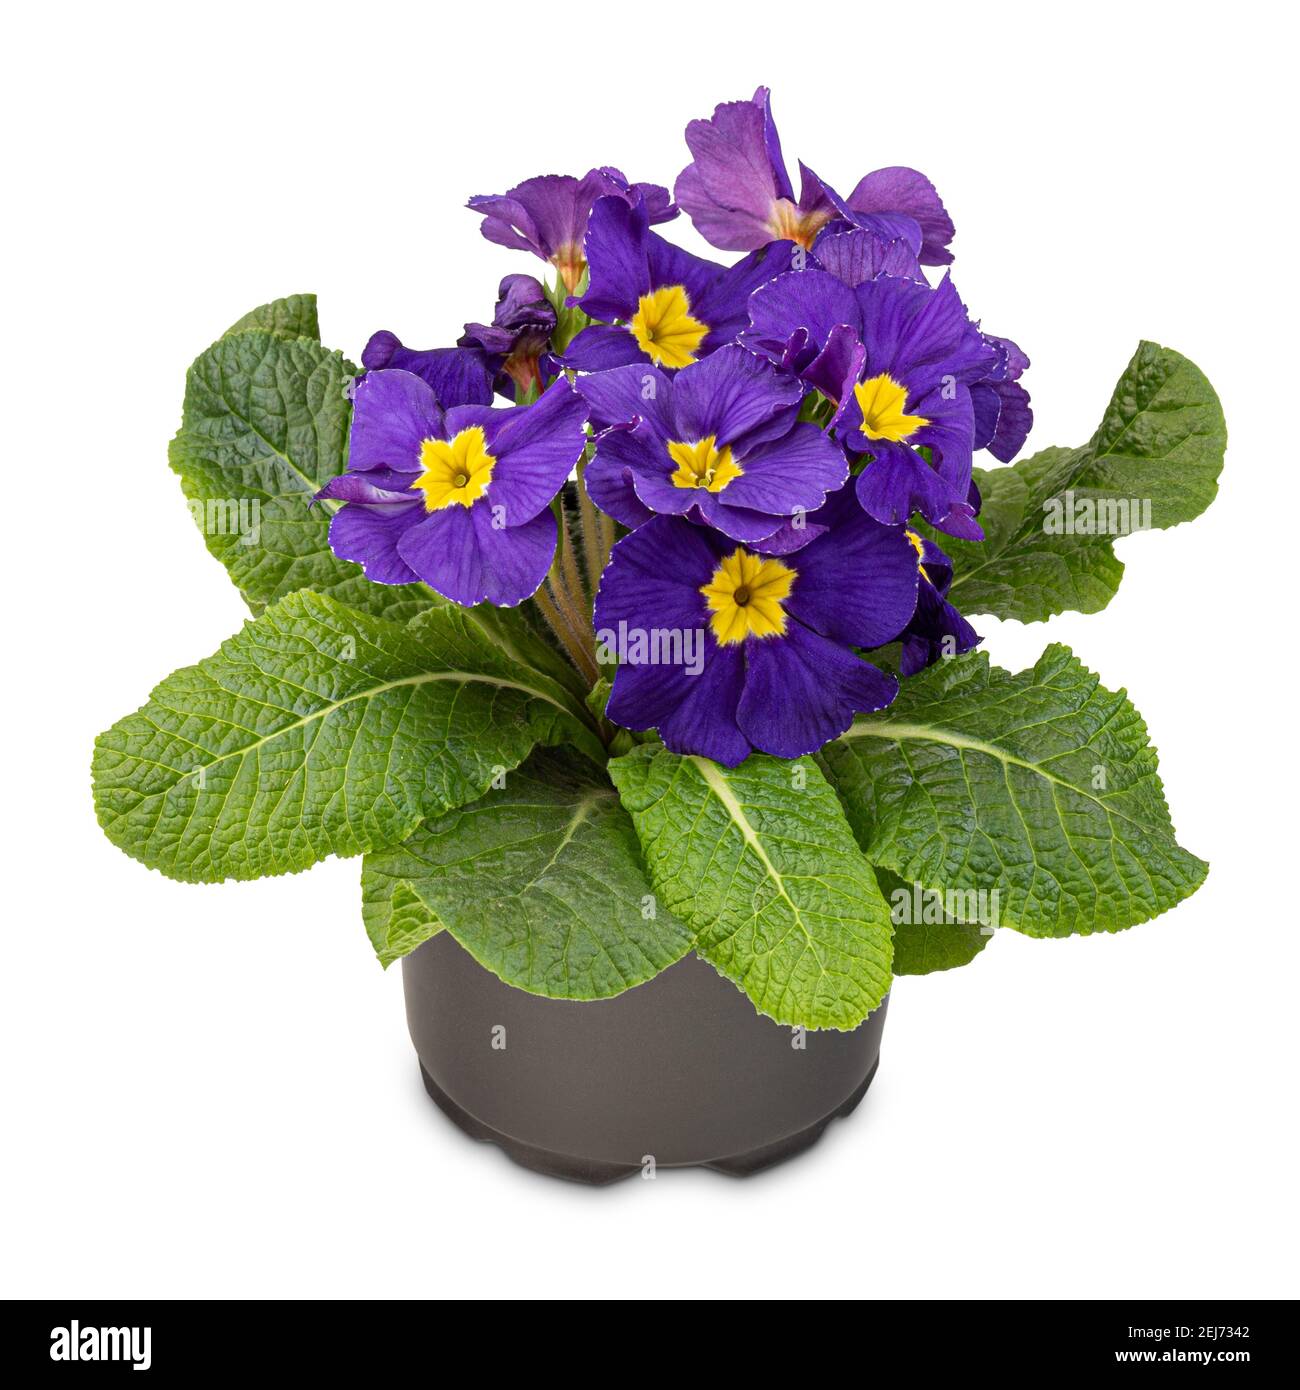 Primula cobalt-blue primrose adorned with a bright yellow centre on white background Stock Photo